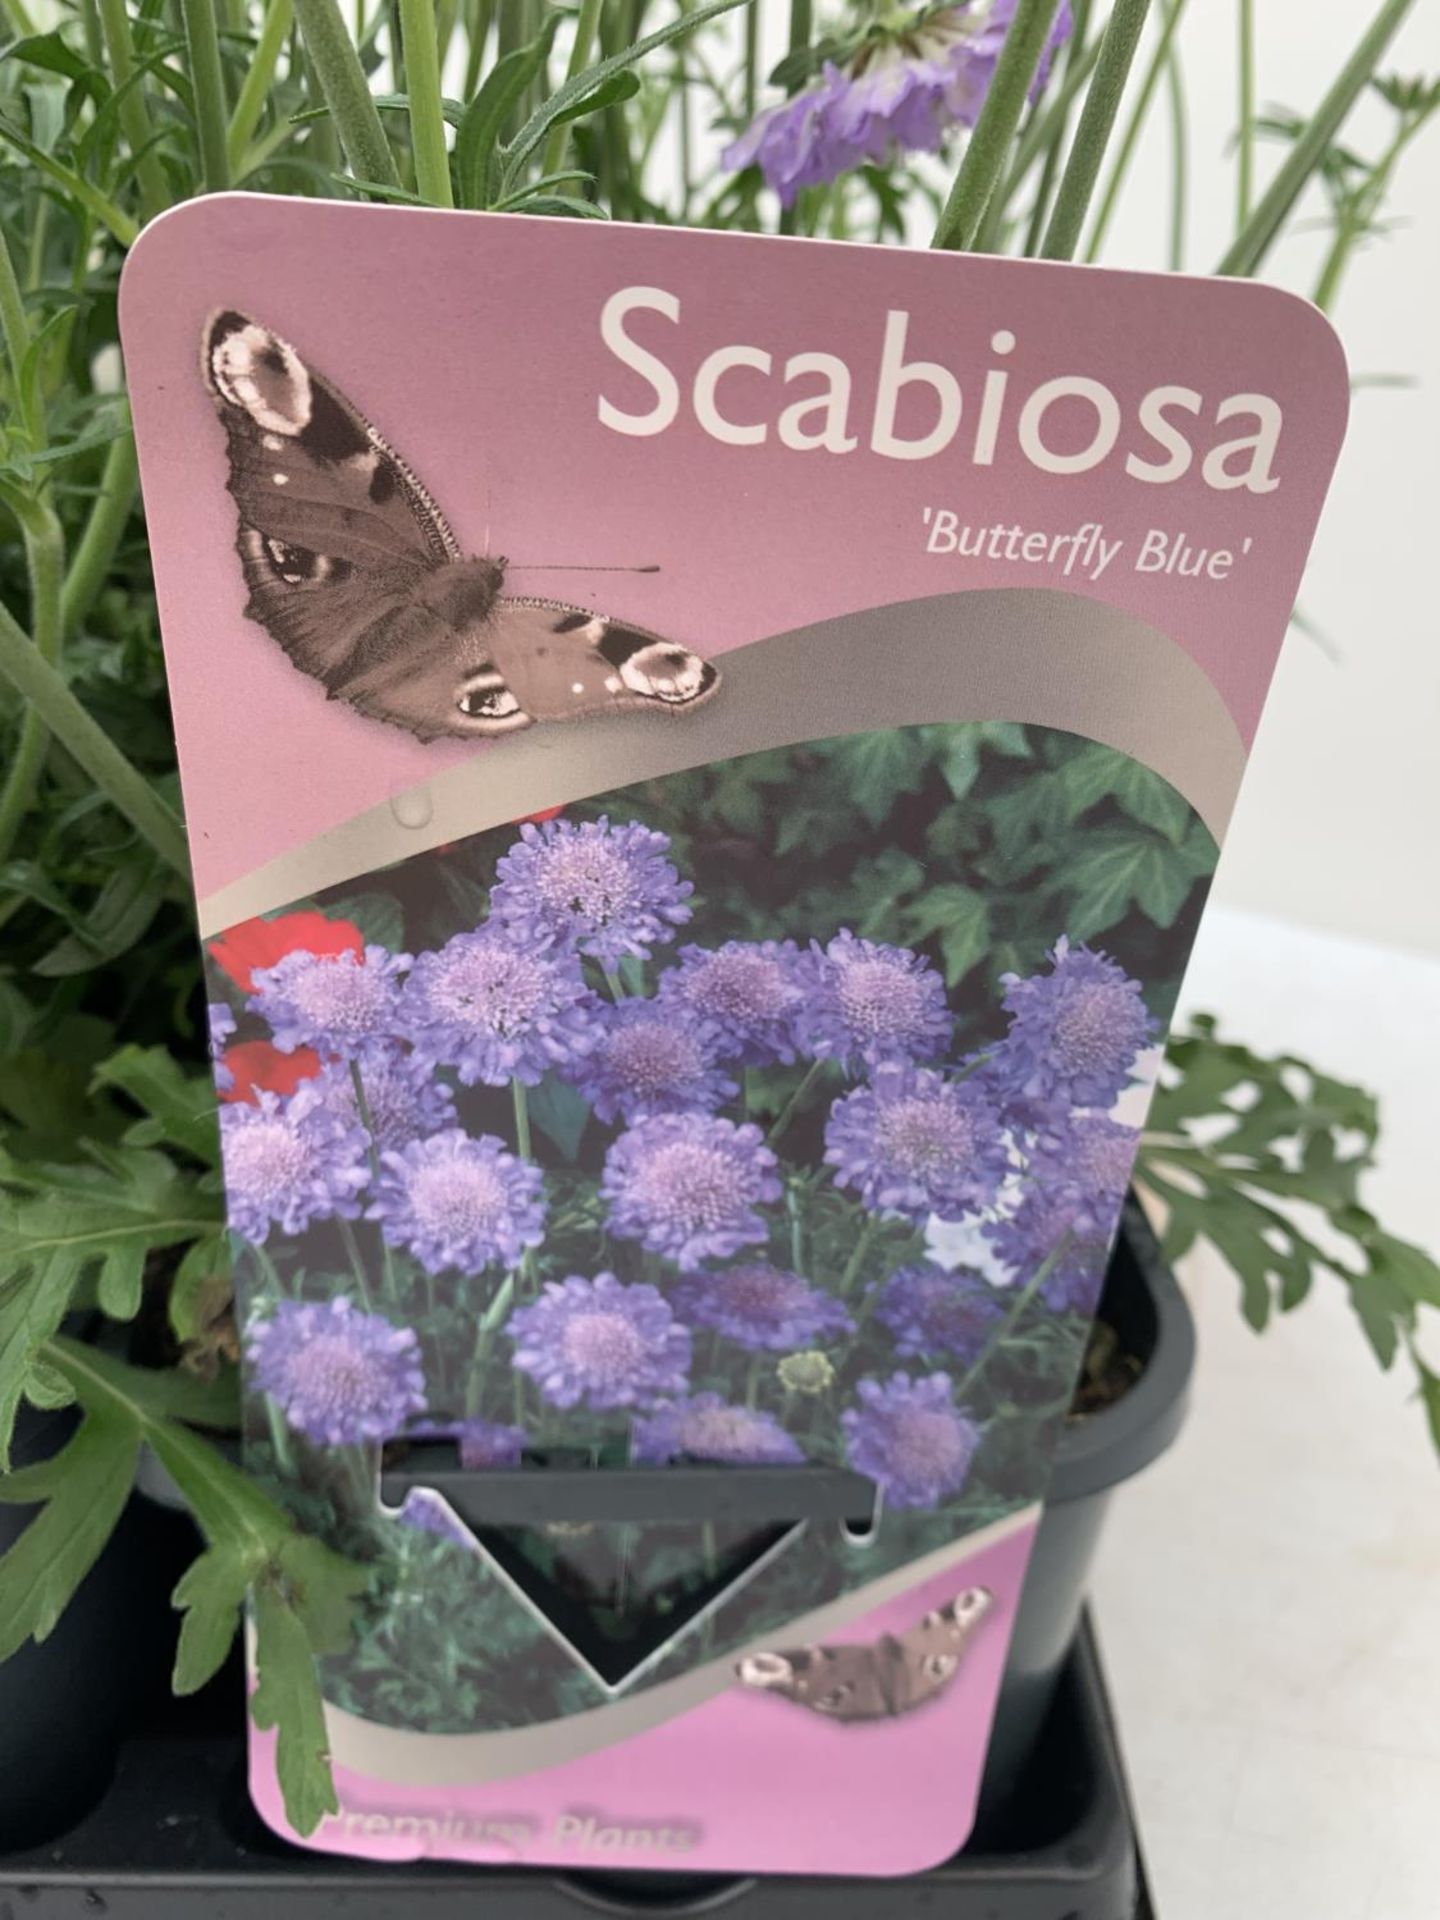 SIX SCABIOSA BUTTERFLY BLUE IN 2 LTR POTS 50-60CM TALL TO BE SOLD FOR THE SIX PLUS VAT - Image 4 of 4